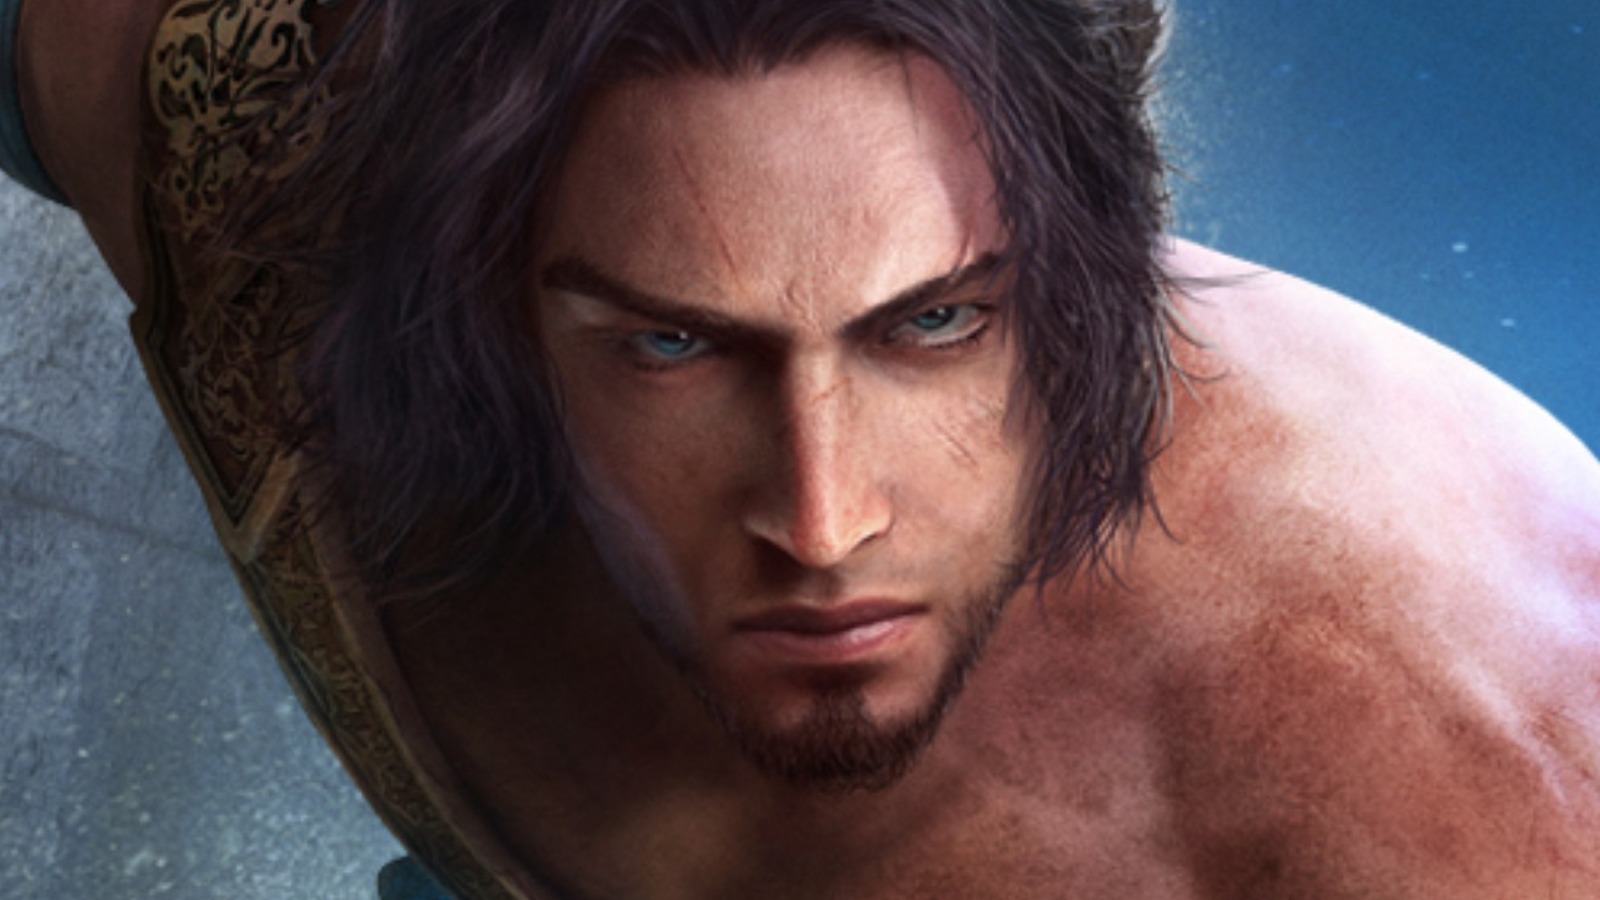 Prince of Persia Remake Not Dead, But Ubisoft Refunding Preorders